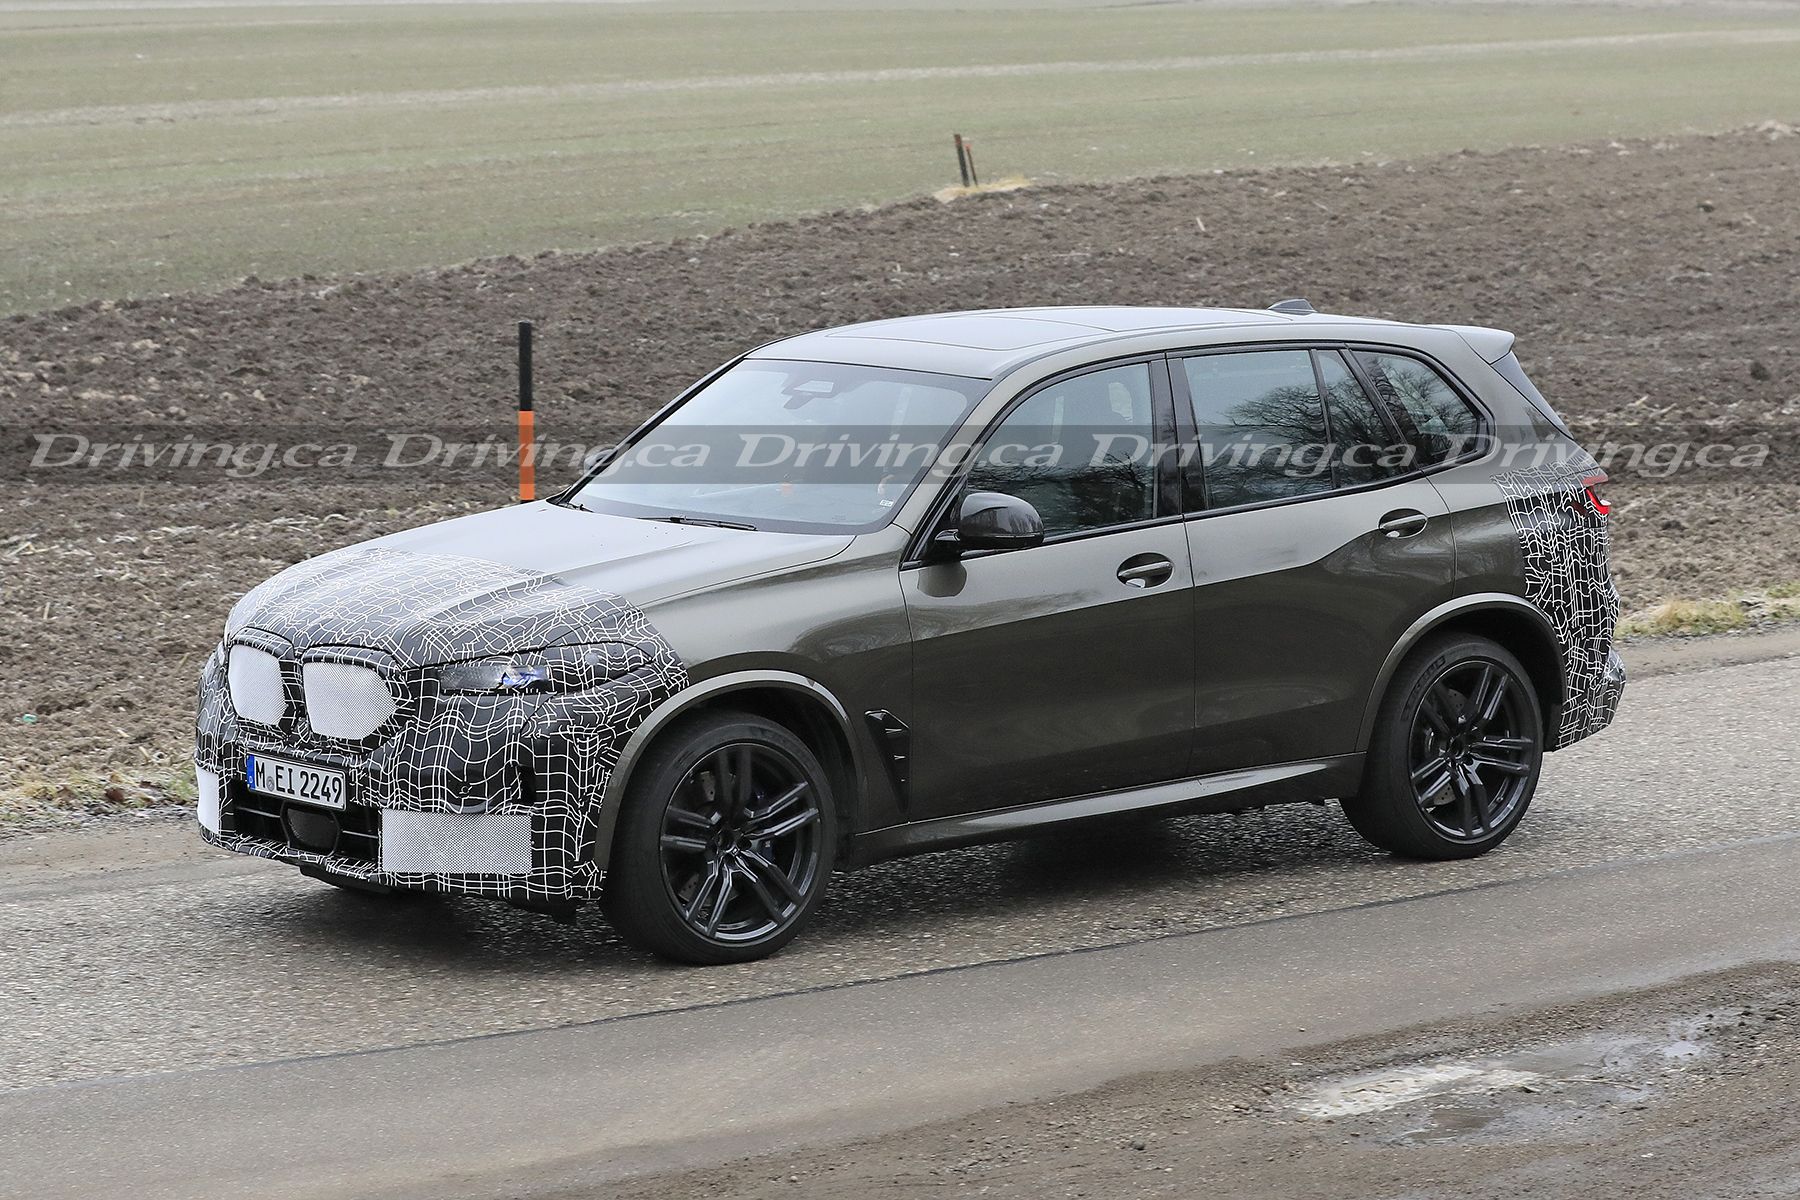 Spied! Photos offer glimpse at 2023 BMW X5's modern facelift